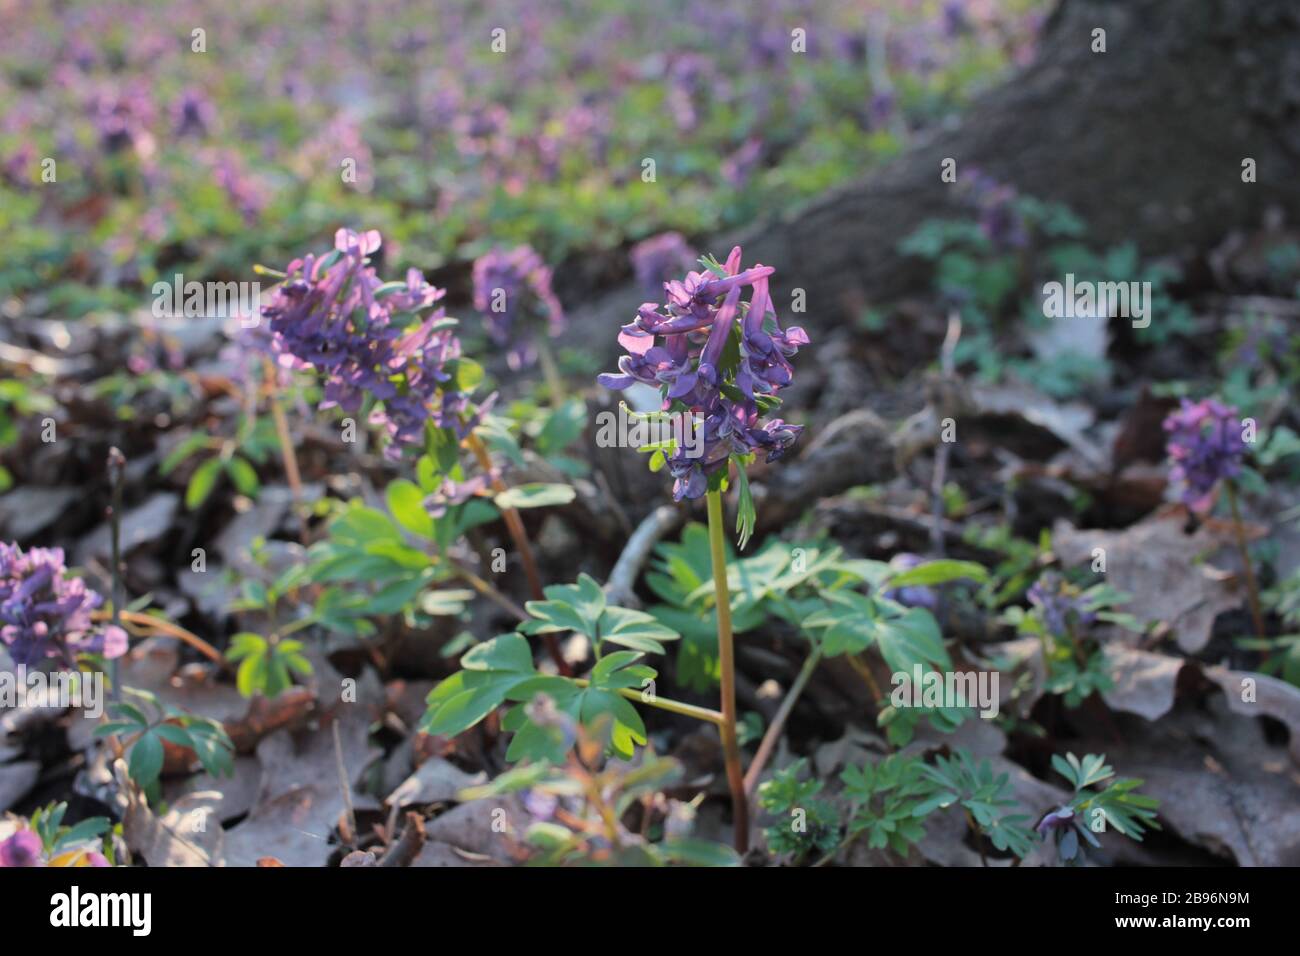 First spring flowers purple bird (fumewort, corydalis solida) among the trees in the forest. Honey and medicinal plants in sunny day Stock Photo